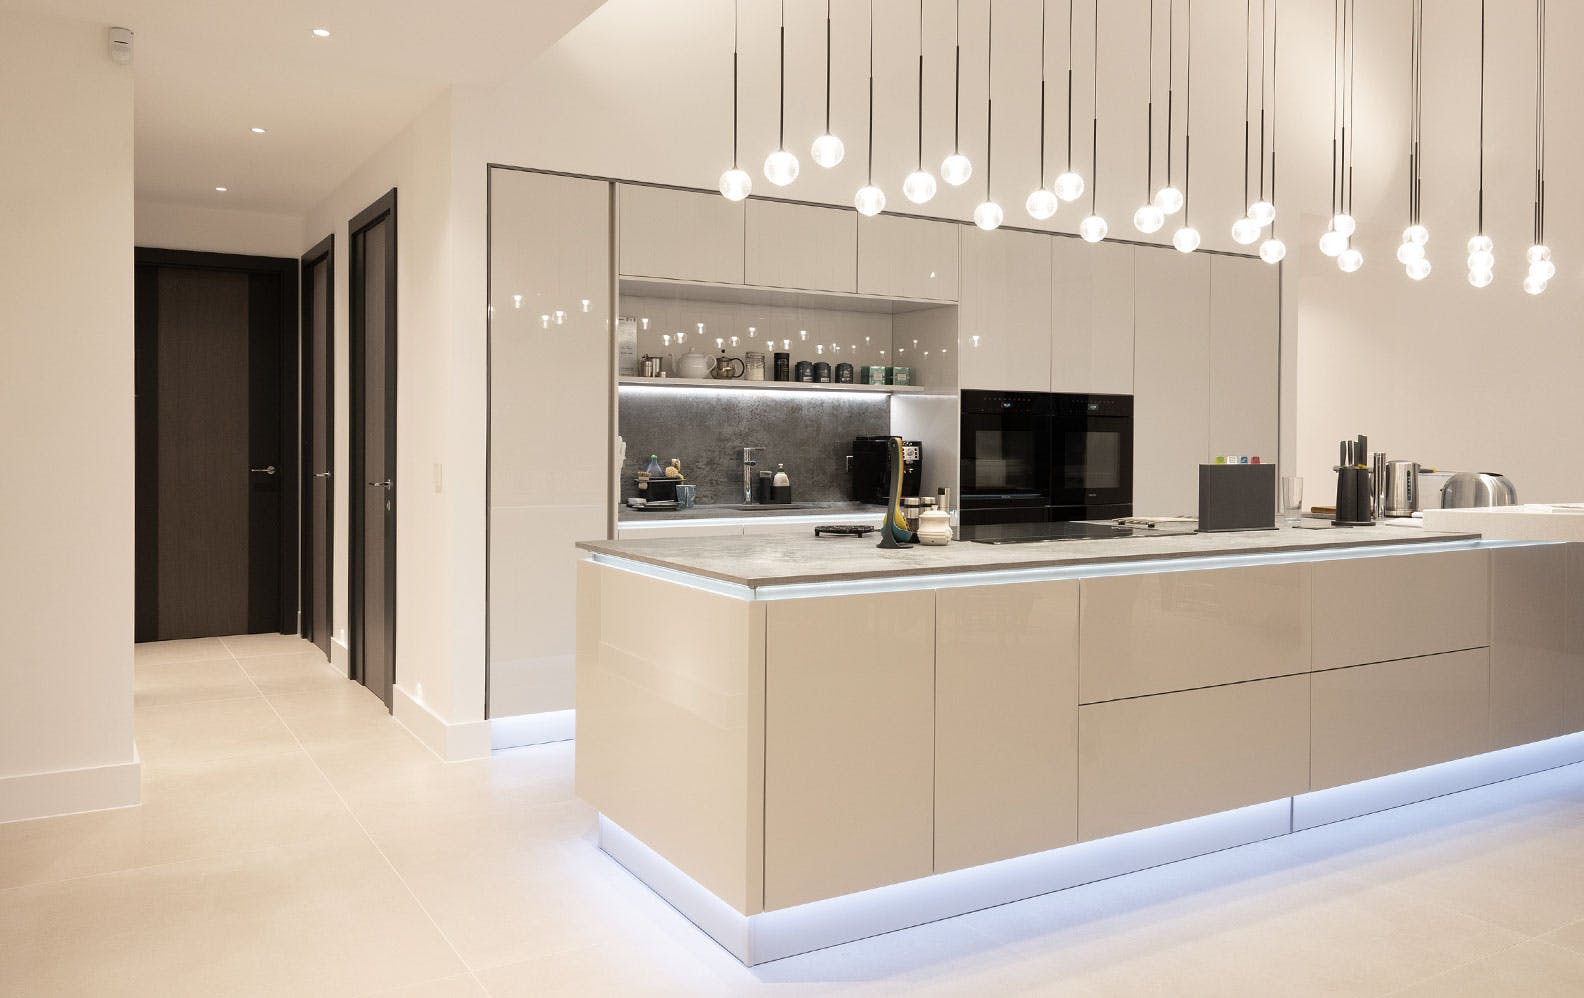 A highly sophisticated kitchen and side corridor with three Deuren made-to-measure internal door sets -  - Linea style and dark grey painted finish.